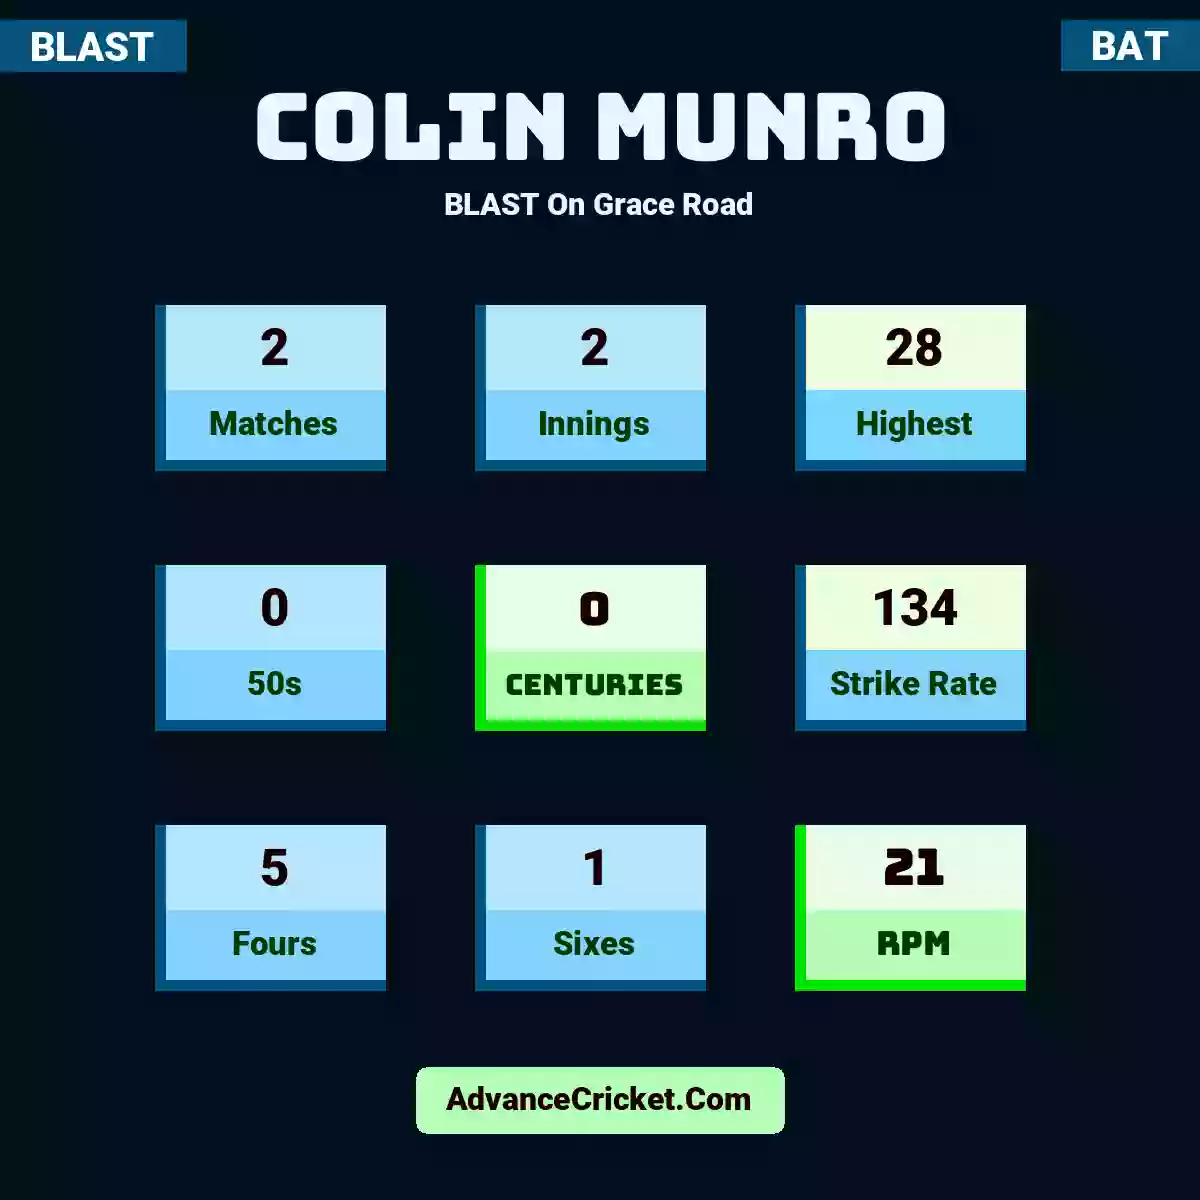 Colin Munro BLAST  On Grace Road, Colin Munro played 2 matches, scored 28 runs as highest, 0 half-centuries, and 0 centuries, with a strike rate of 134. C.Munro hit 5 fours and 1 sixes, with an RPM of 21.